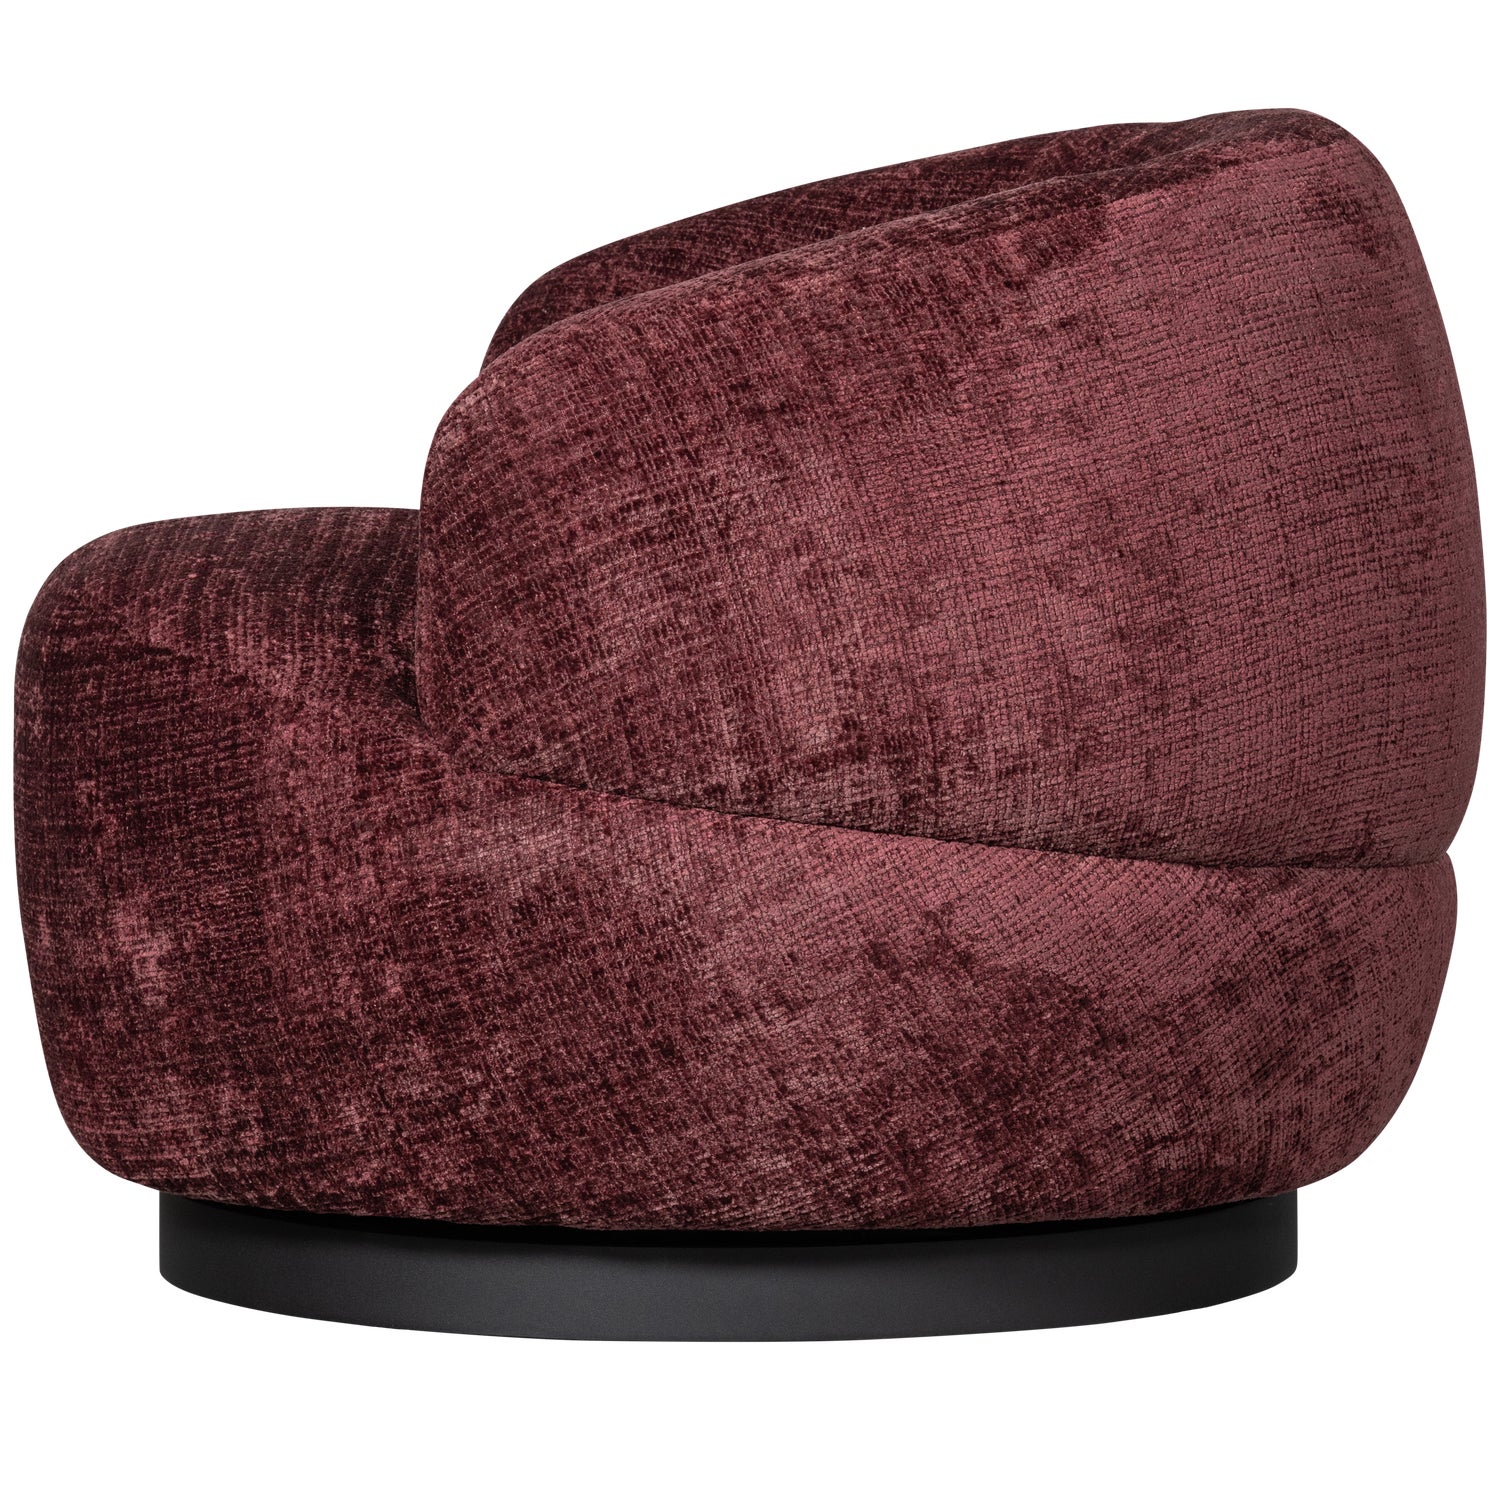 800037-A-03_VS_FA_Woolly_draaifauteuil_chenille_aubergine.png?auto=webp&format=png&width=1500&height=1500